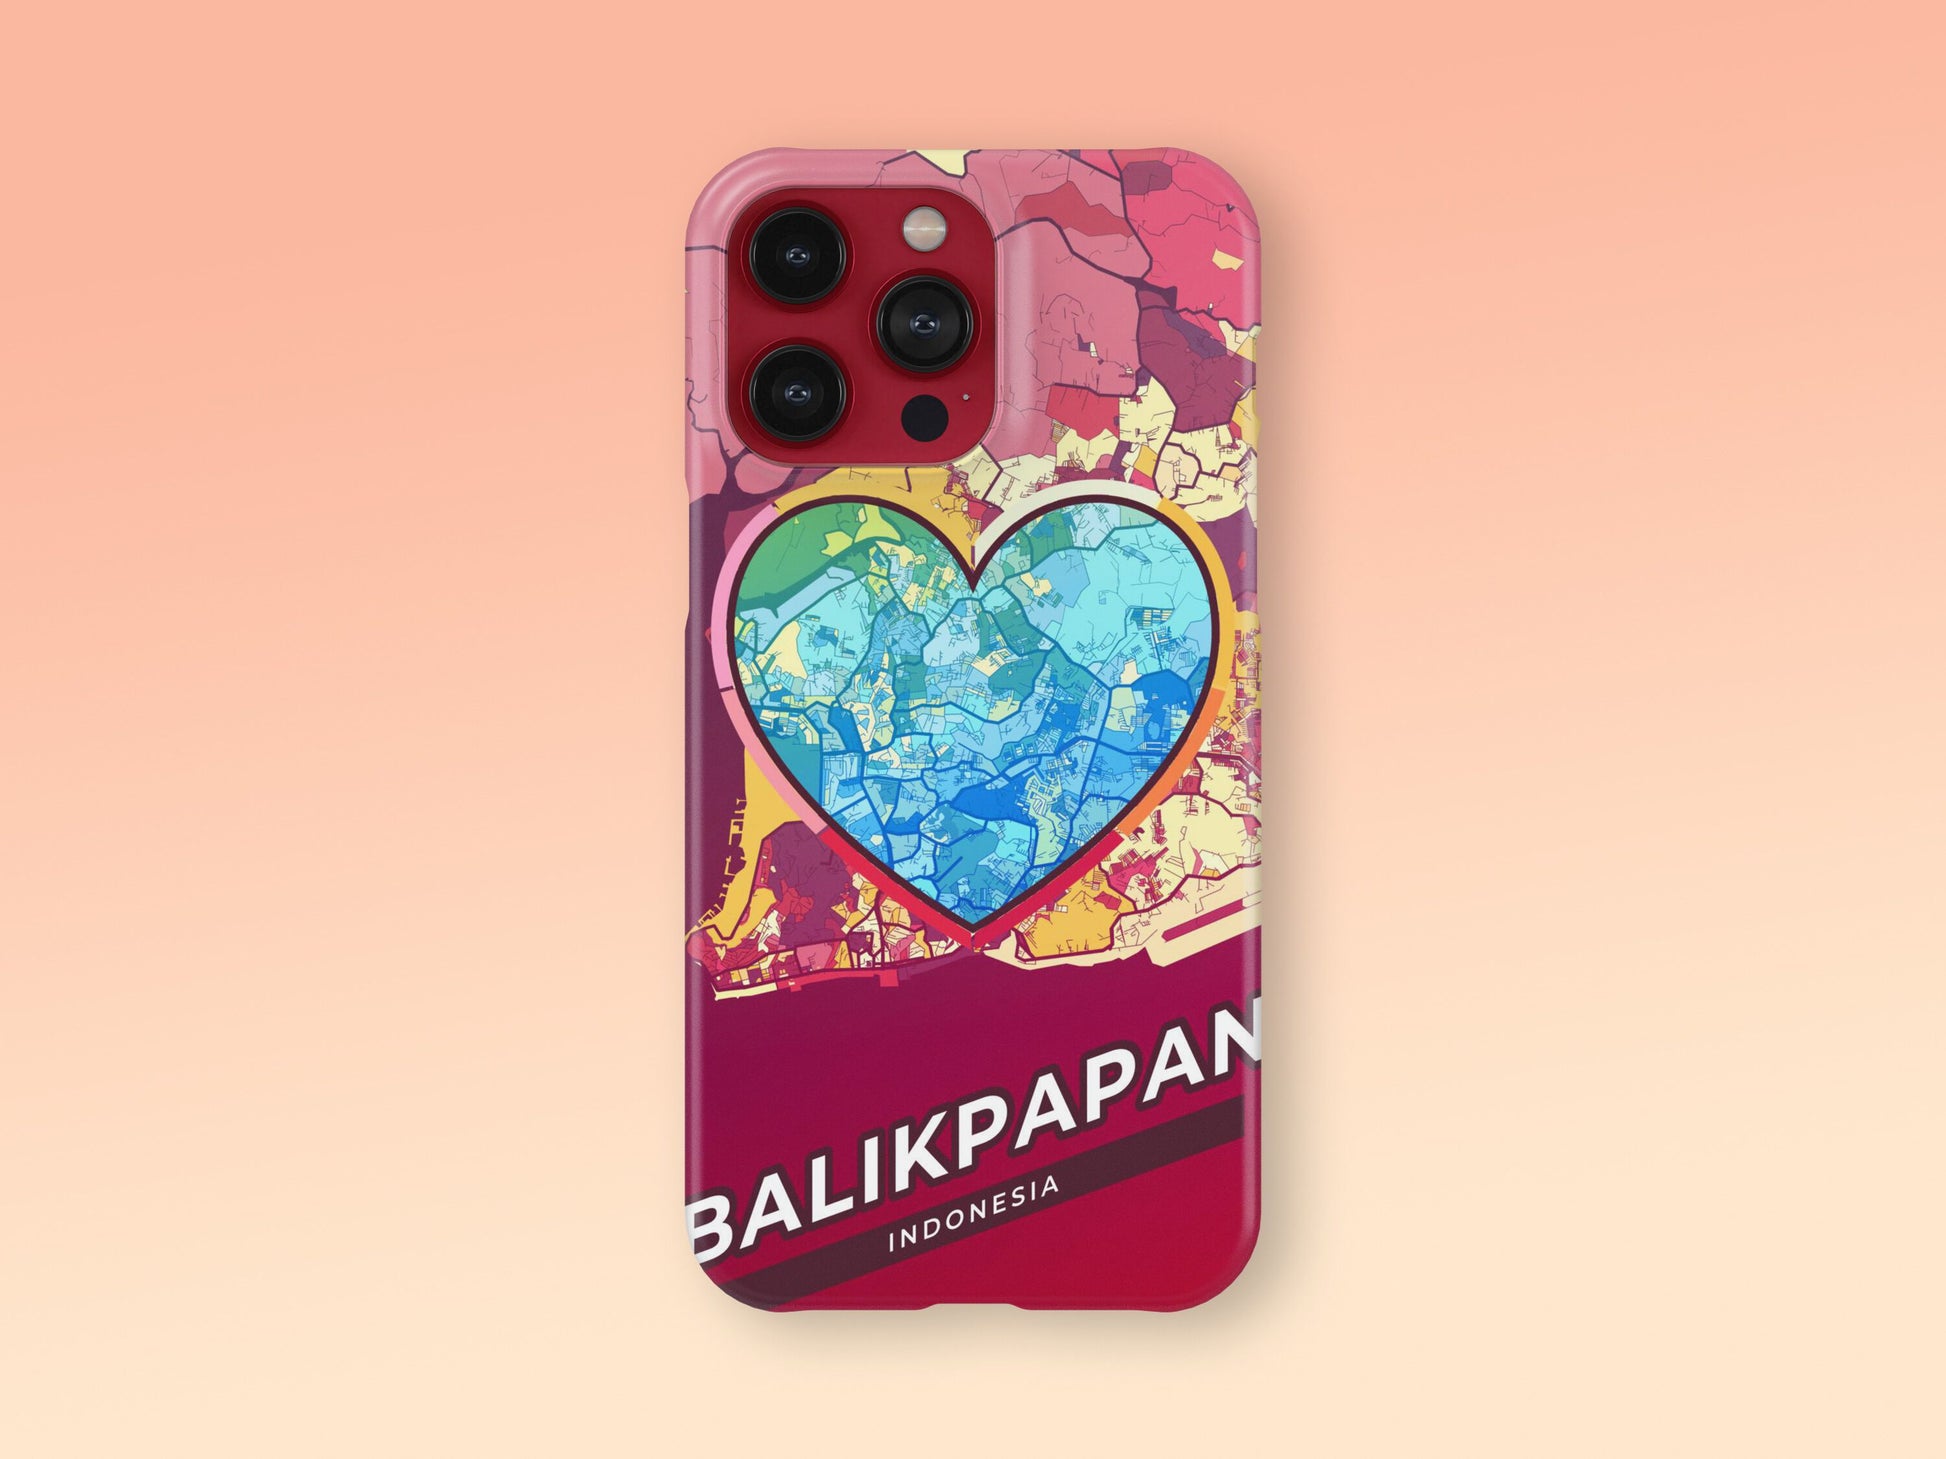 Balikpapan Indonesia slim phone case with colorful icon. Birthday, wedding or housewarming gift. Couple match cases. 2